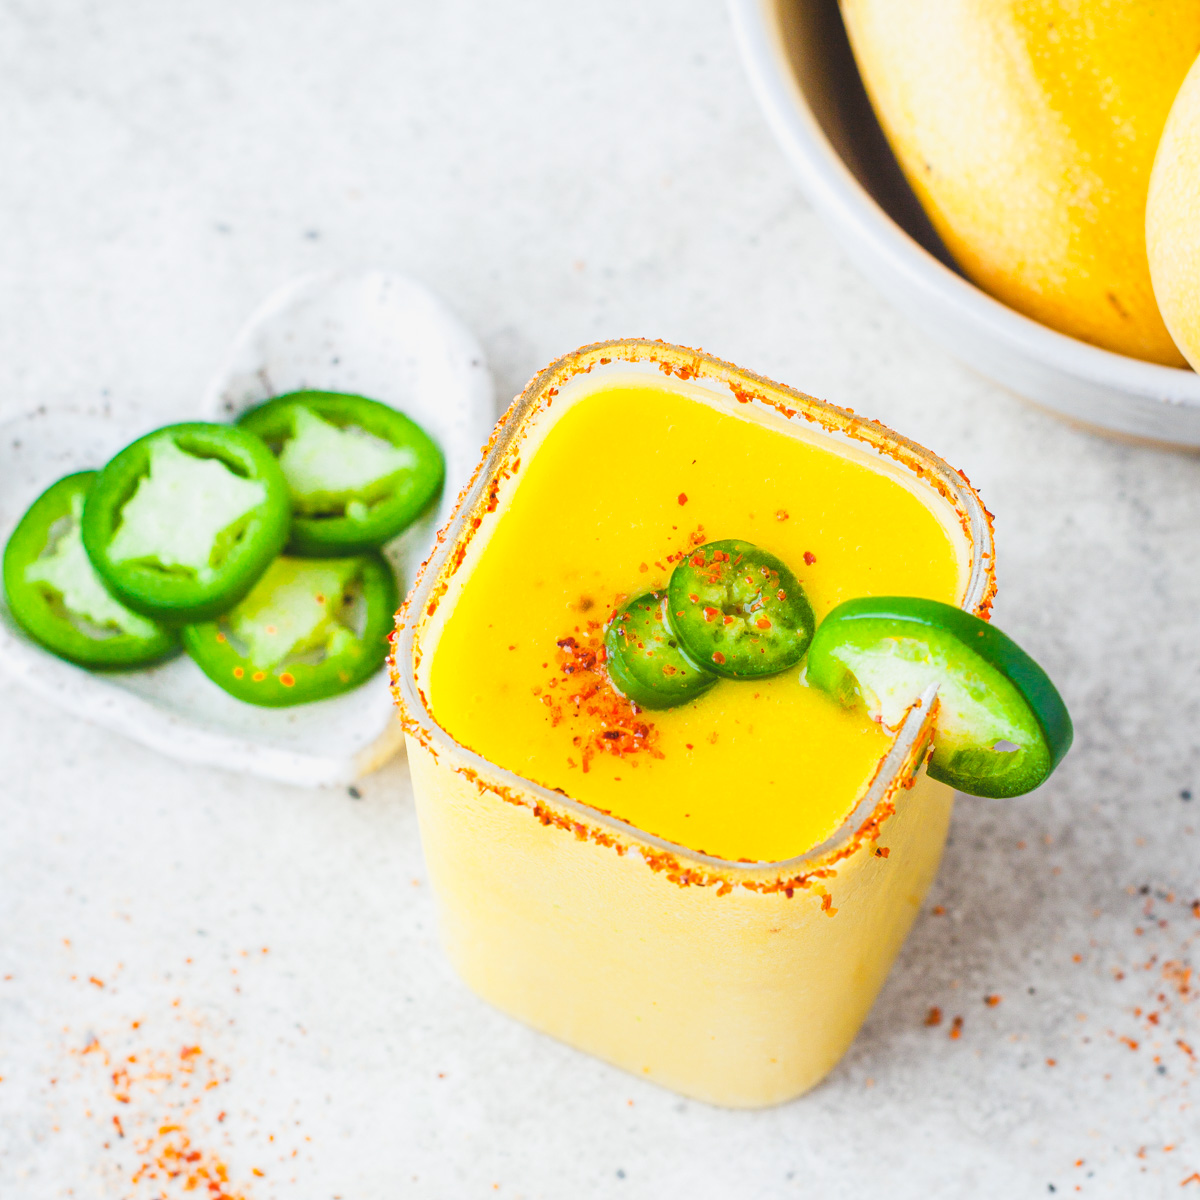 A square rocks glass filled with with vibrant spicy mango margarita garnished with jalapeños and Tajin seasoning beside a bowl of mangos.